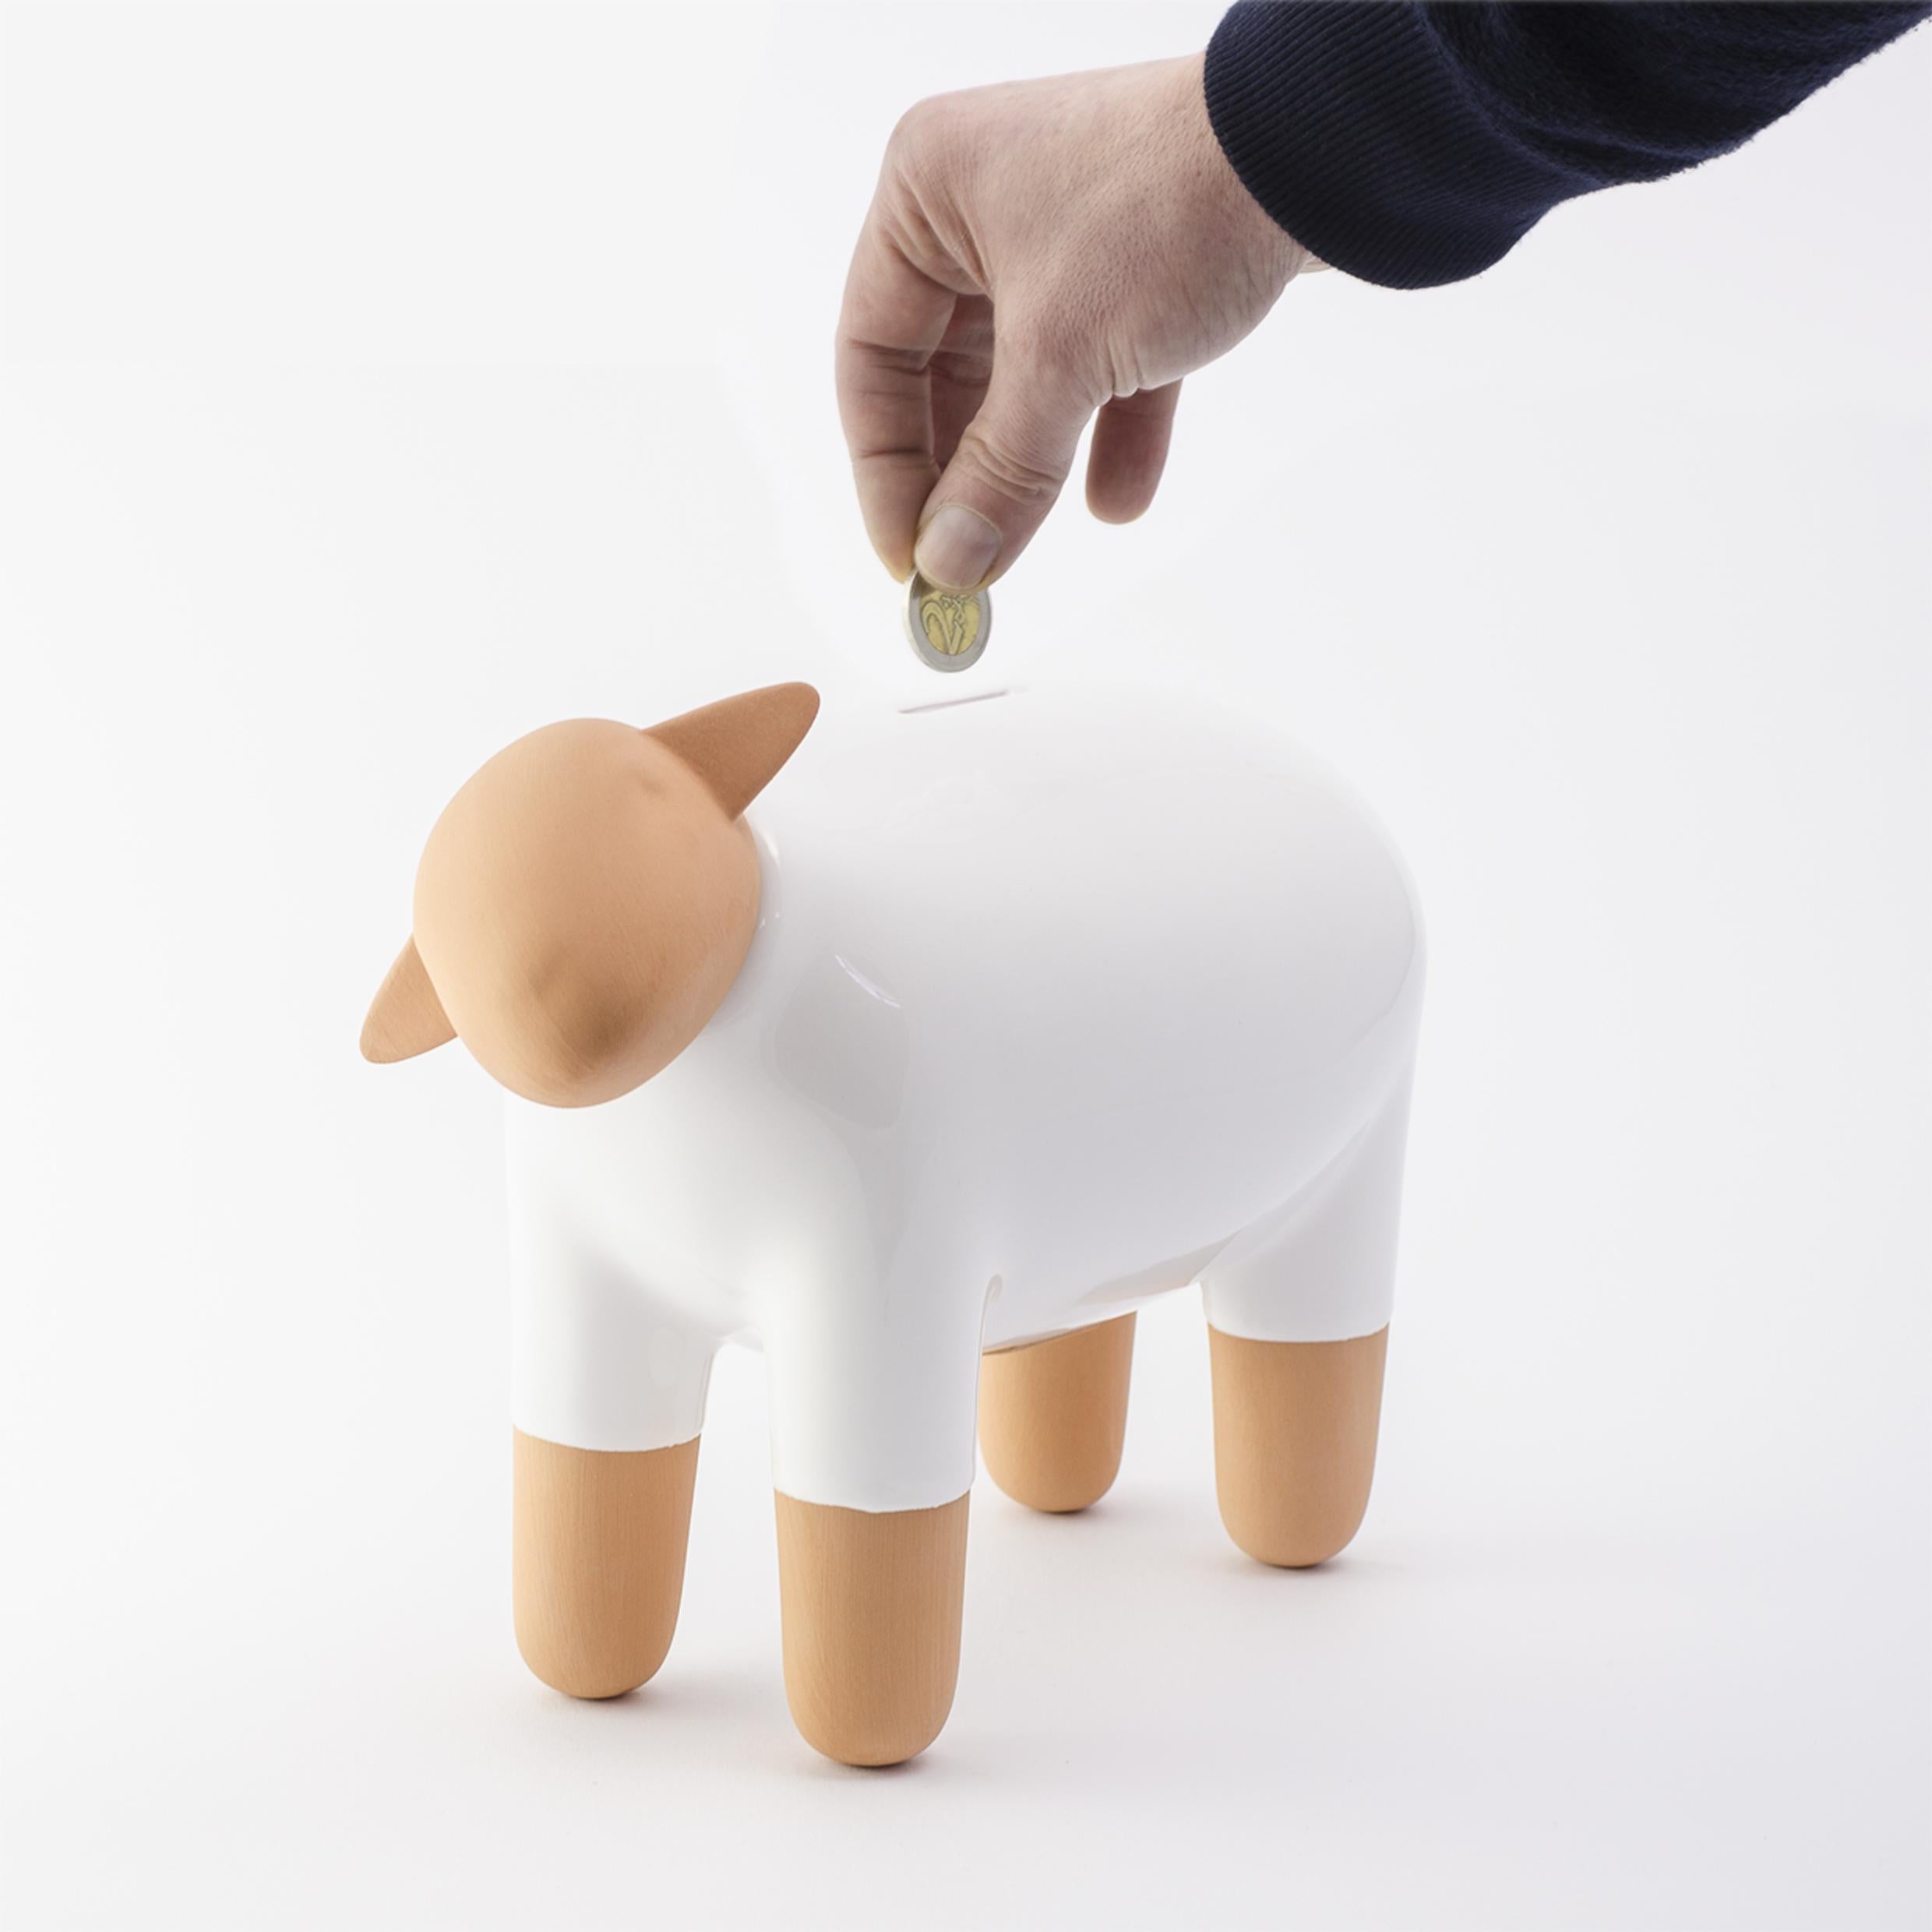 These splendid ceramic creations are born from the artistic laboratory of Mosche Bianche. 

The piggy bank, a means that has always been used to remind us of the importance of saving, takes on a playful and artistic role with the shape of a sheep,